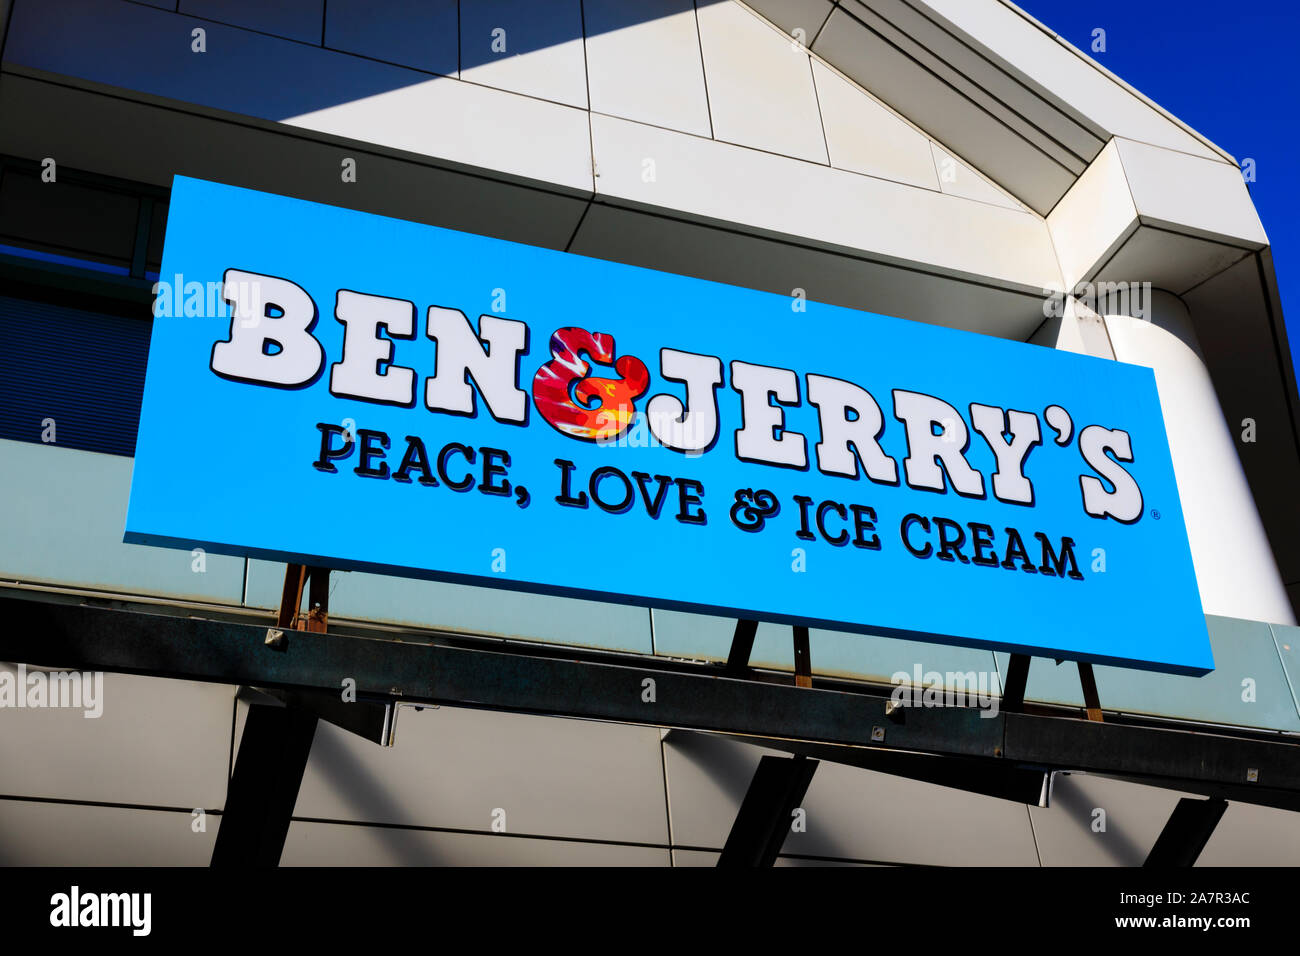 Ben and Jerry’s ice cream sign, Jack London Square, Oakland, Alameda County, California, United States of America Stock Photo